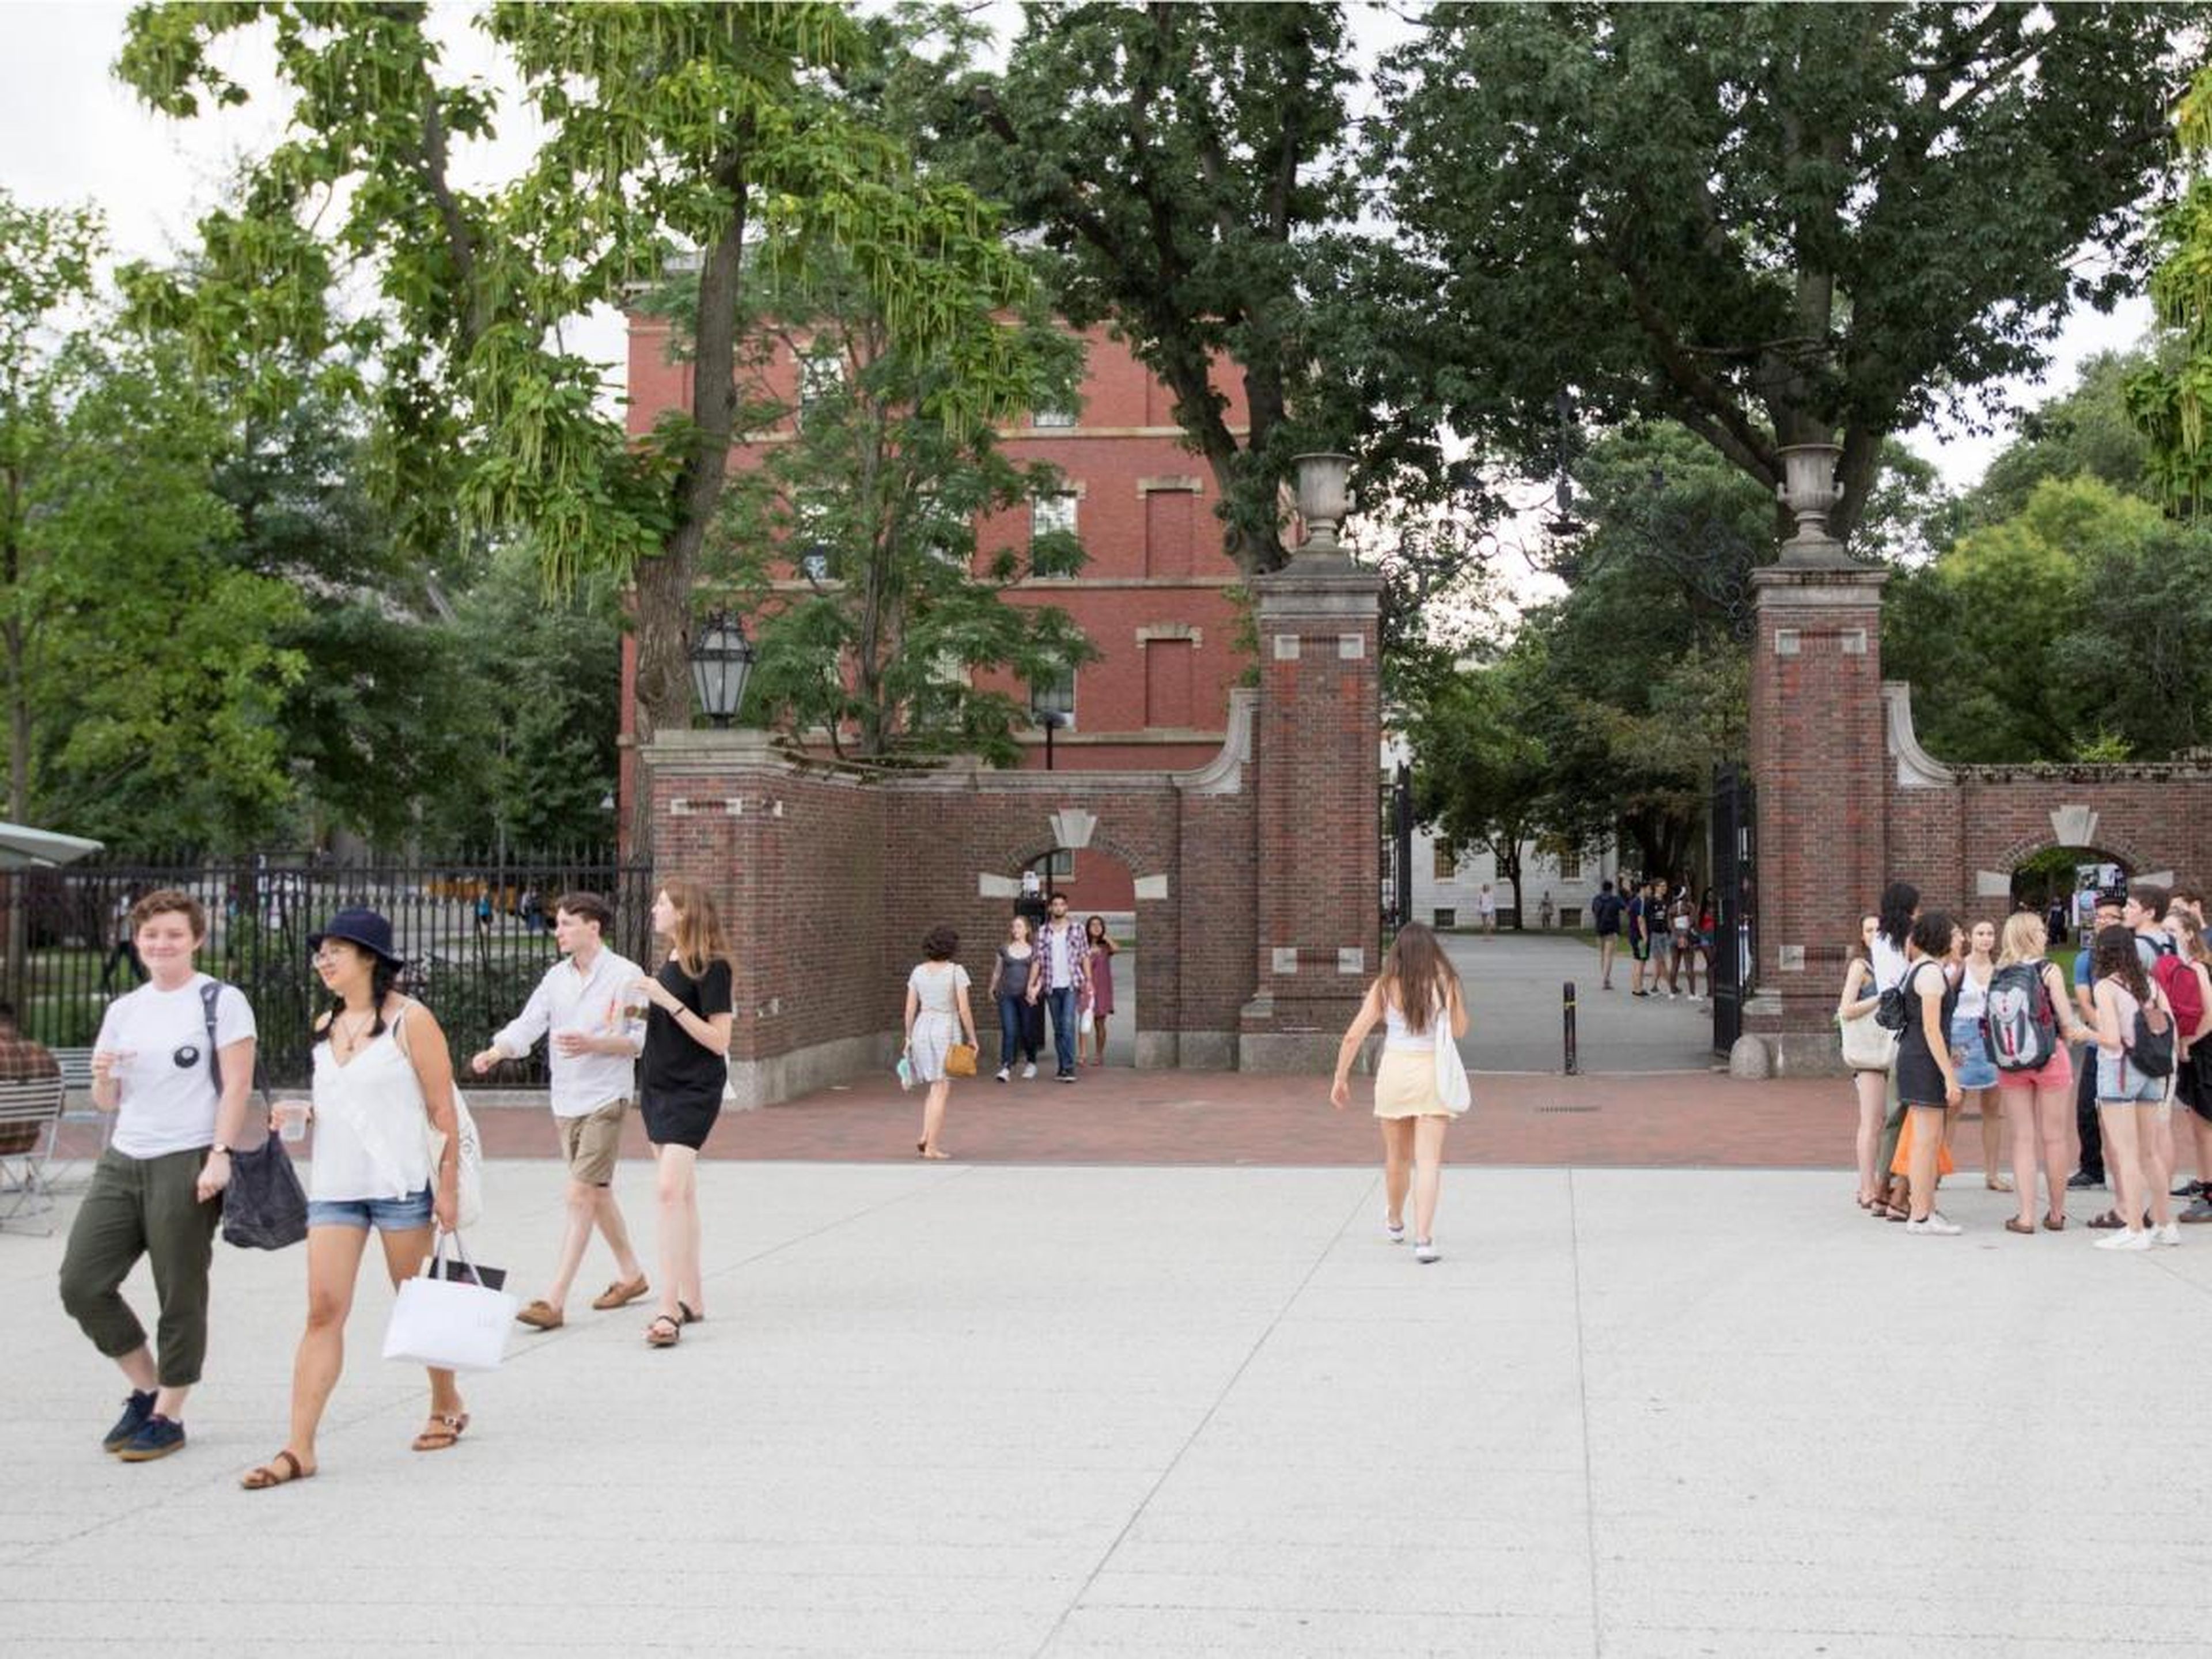 About 98% of students at Harvard live in housing owned, operated, or affiliated with the school.